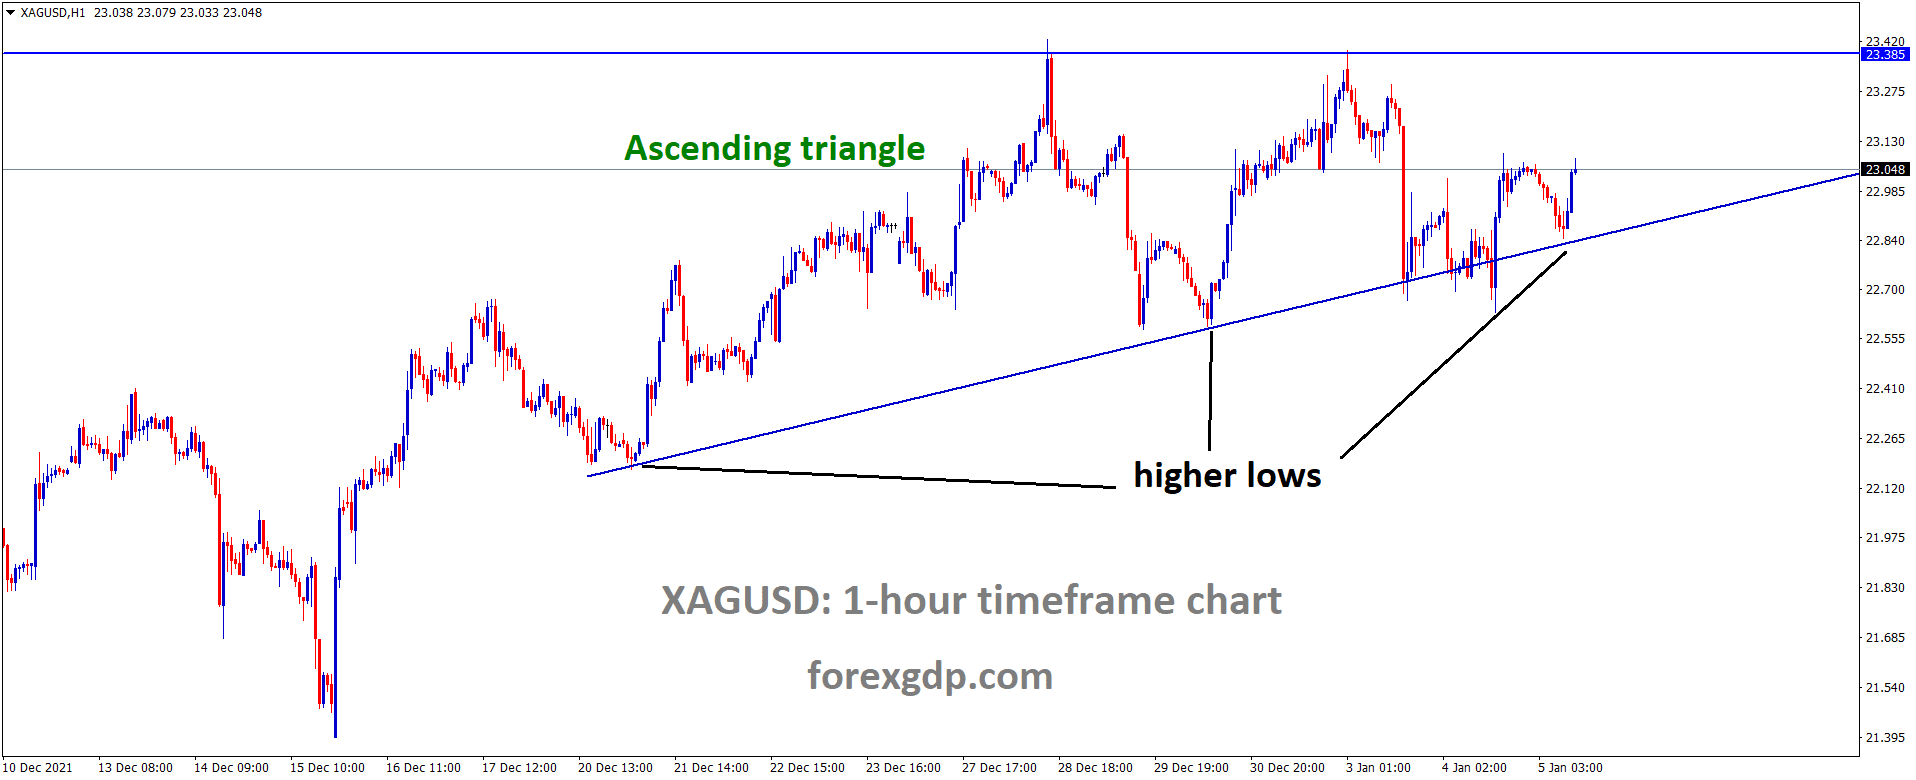 XAGUSD Silver prices are moving in an ascending triangle pattern